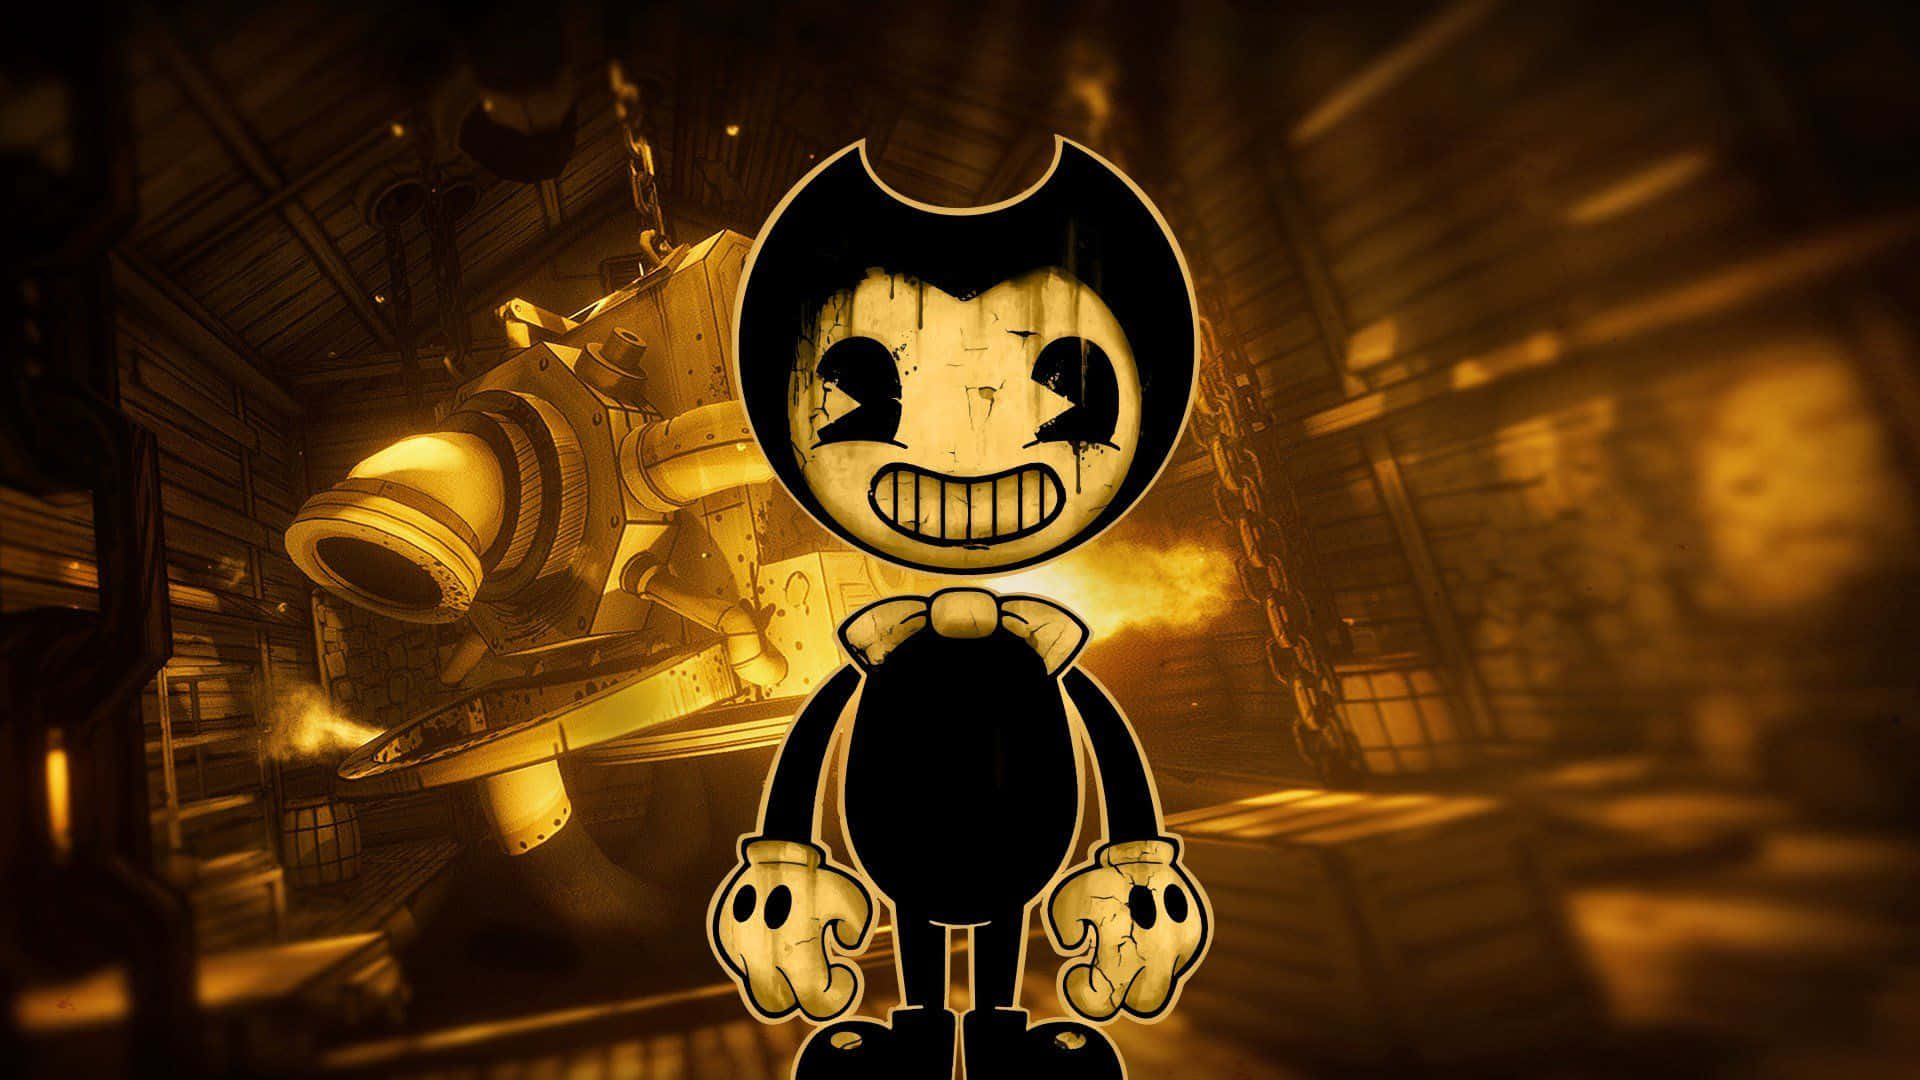 Bendy Striking A Pose In The Vintage World Of Animation Background